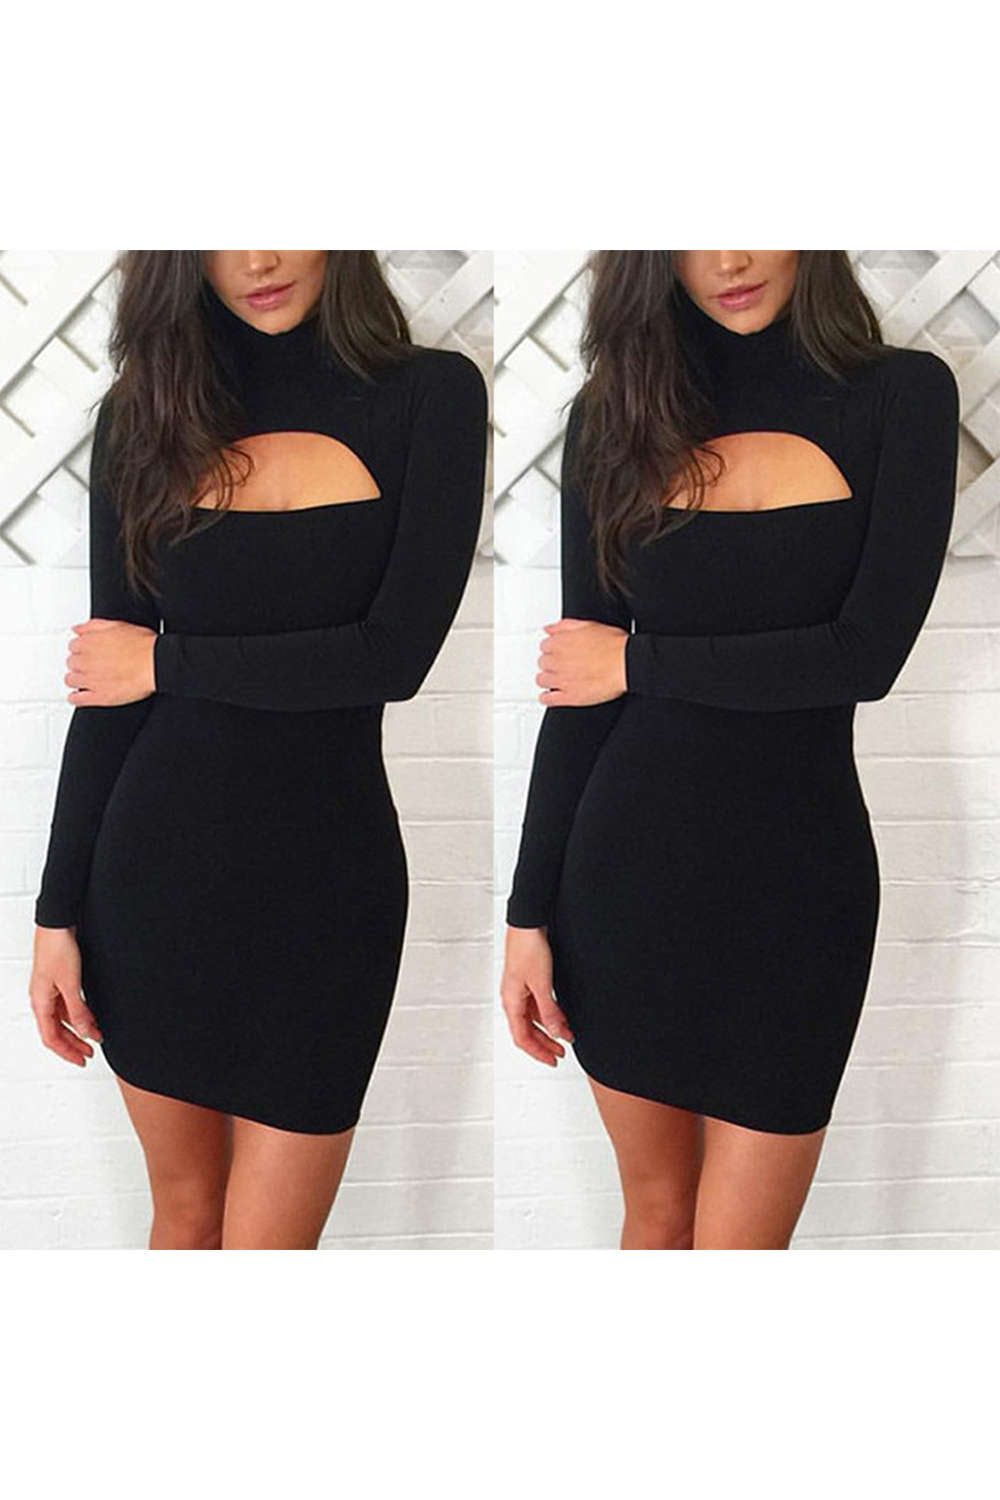 Iyasson Women Long Sleeve Chest Hollow Party Bodycon Dress